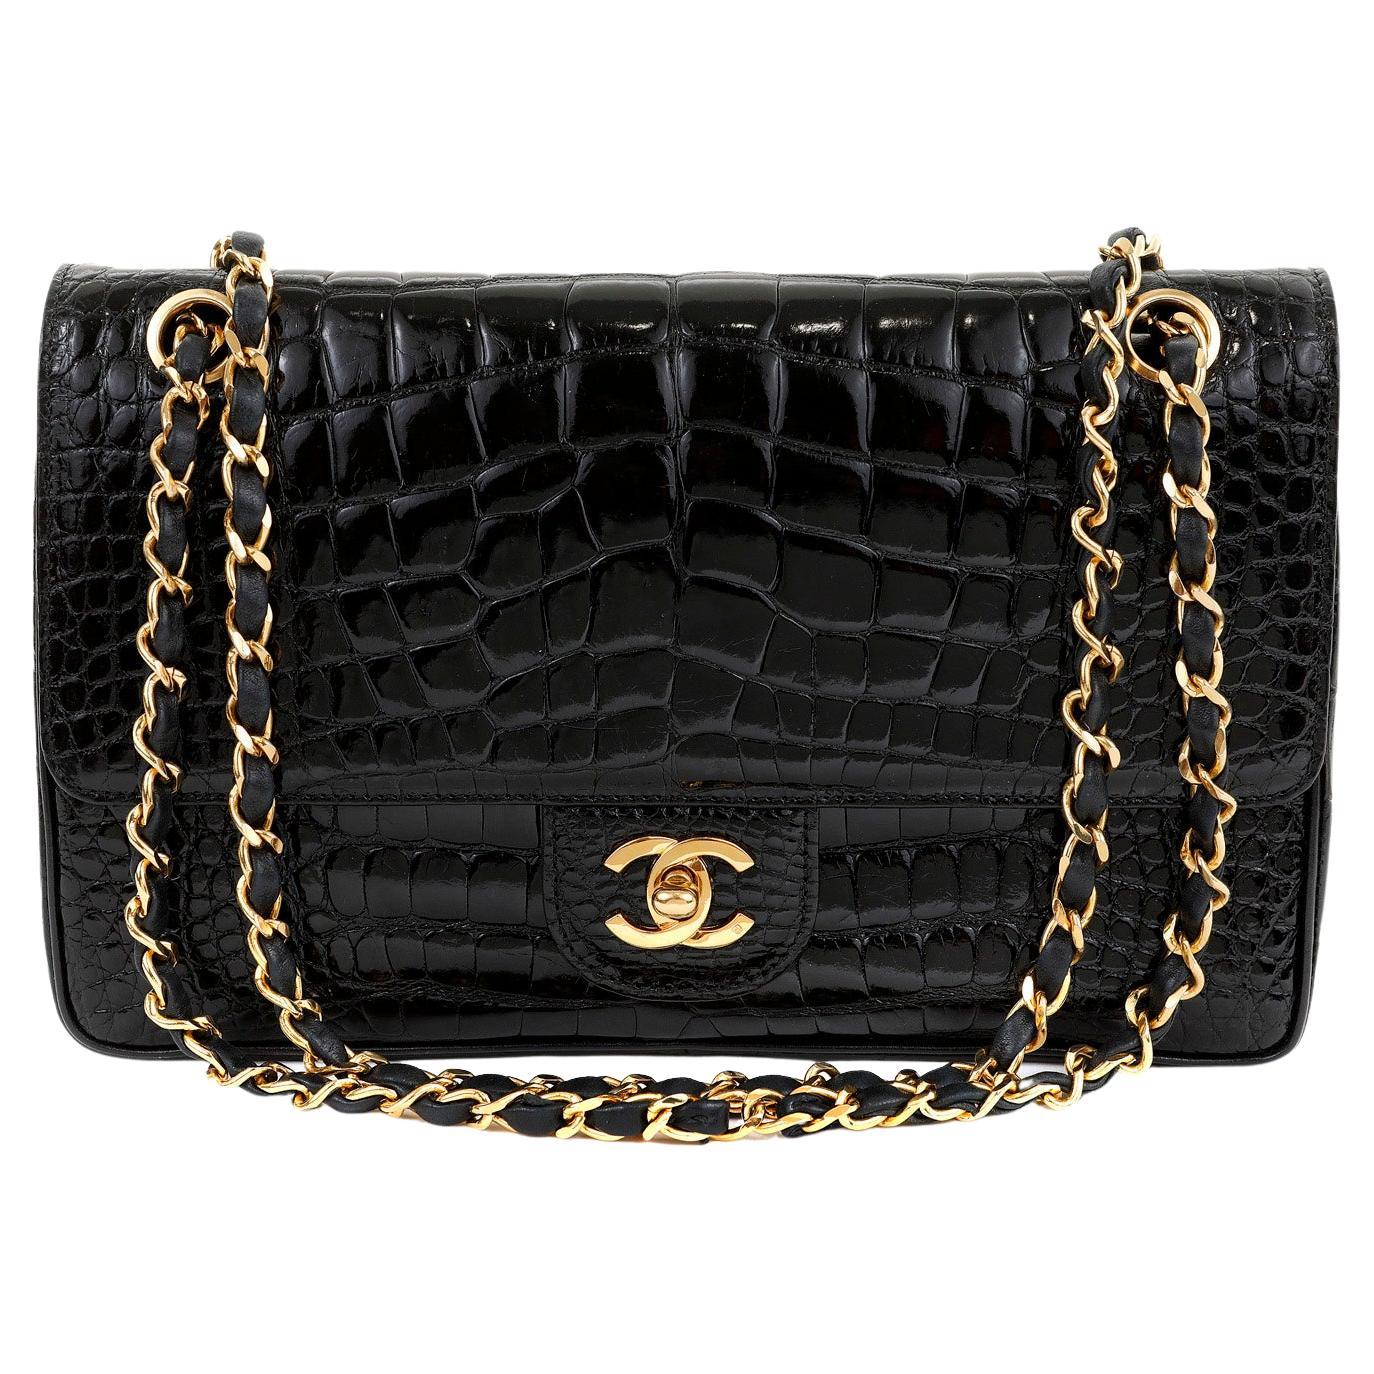 Pre-owned Black Alligator Small Vintage Classic Single Flap Bag